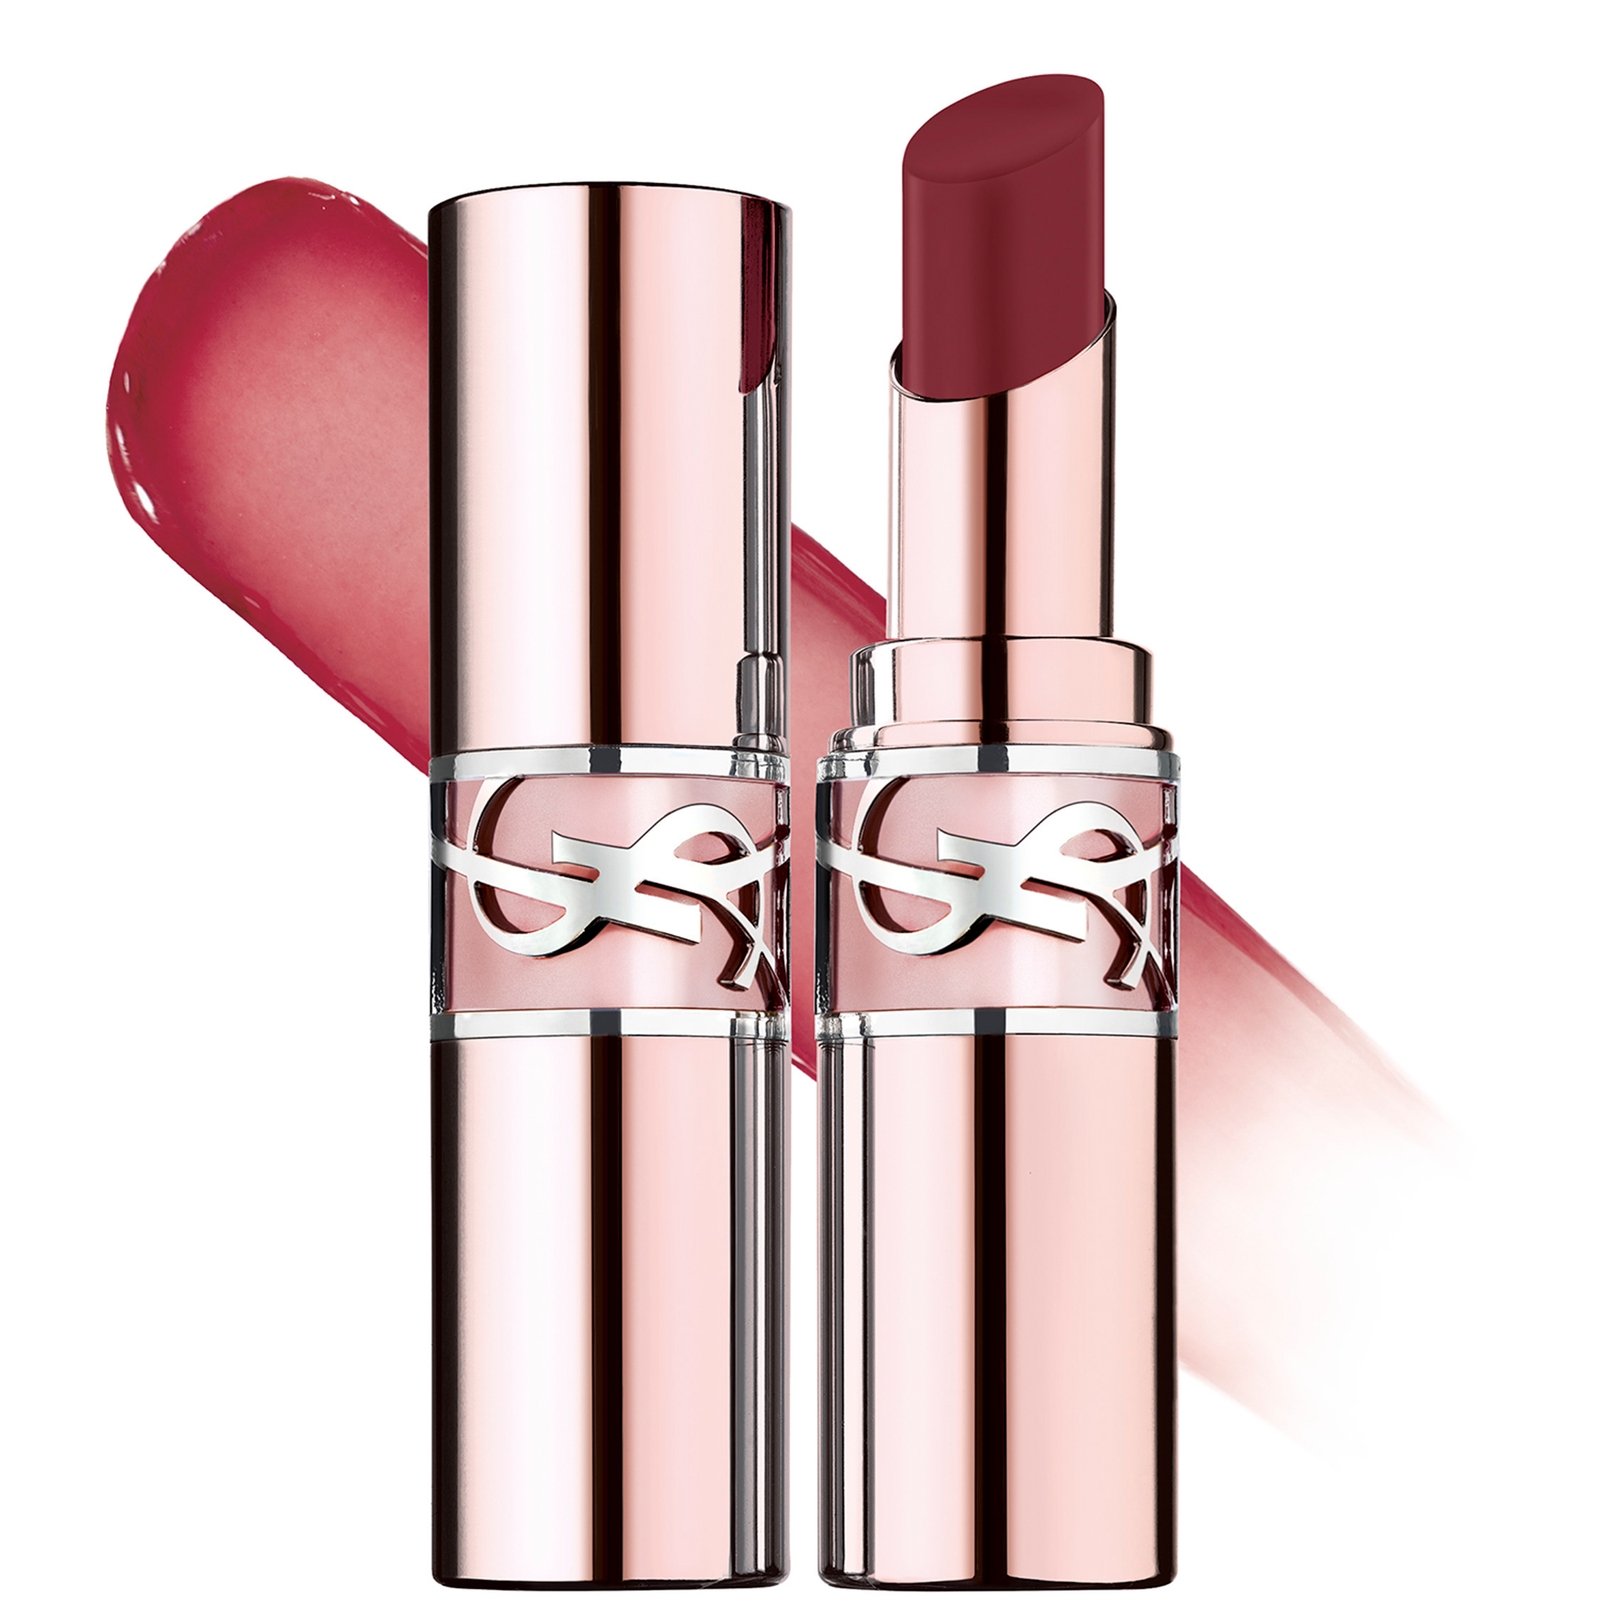 Image of Yves Saint Laurent Loveshine Candy Glow Lip Balm (Various Shades) - Brown Nude